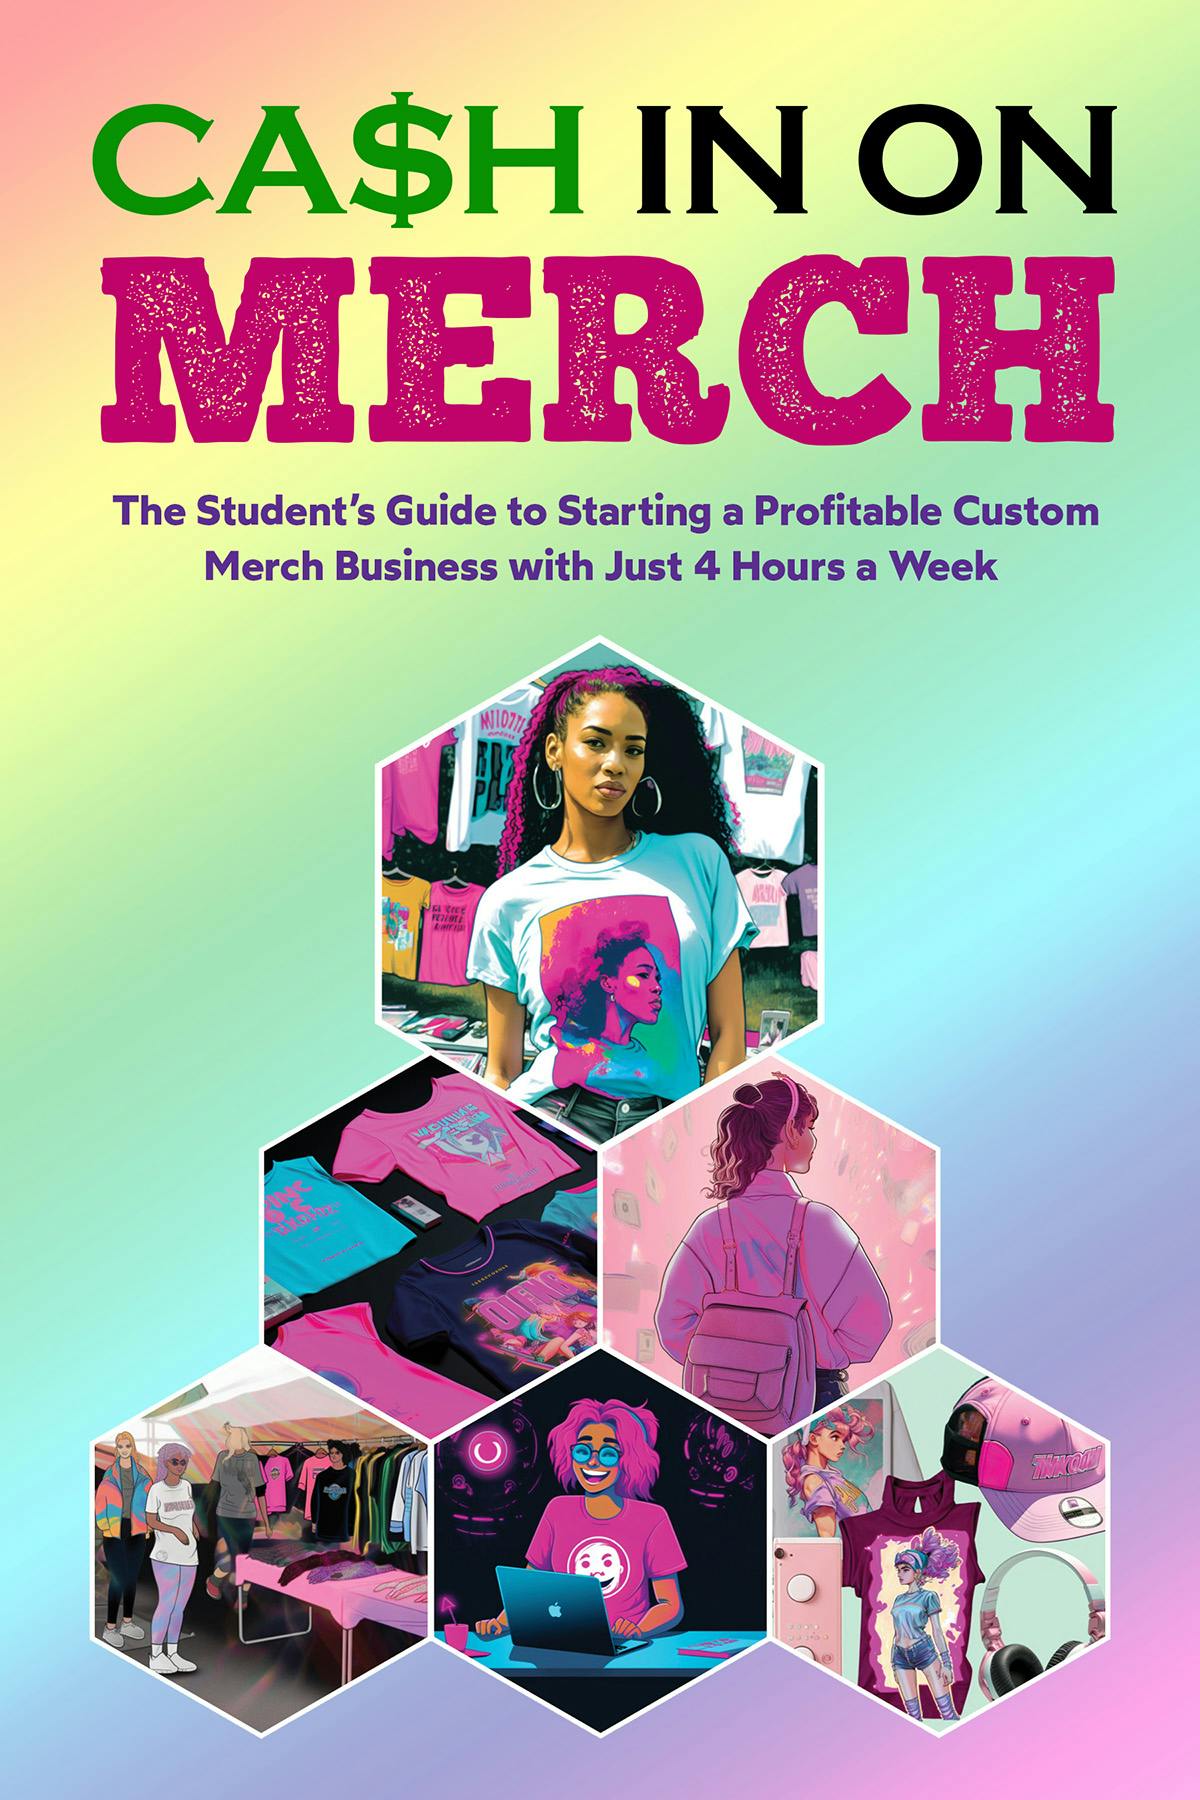 Cash In On Merch book cover